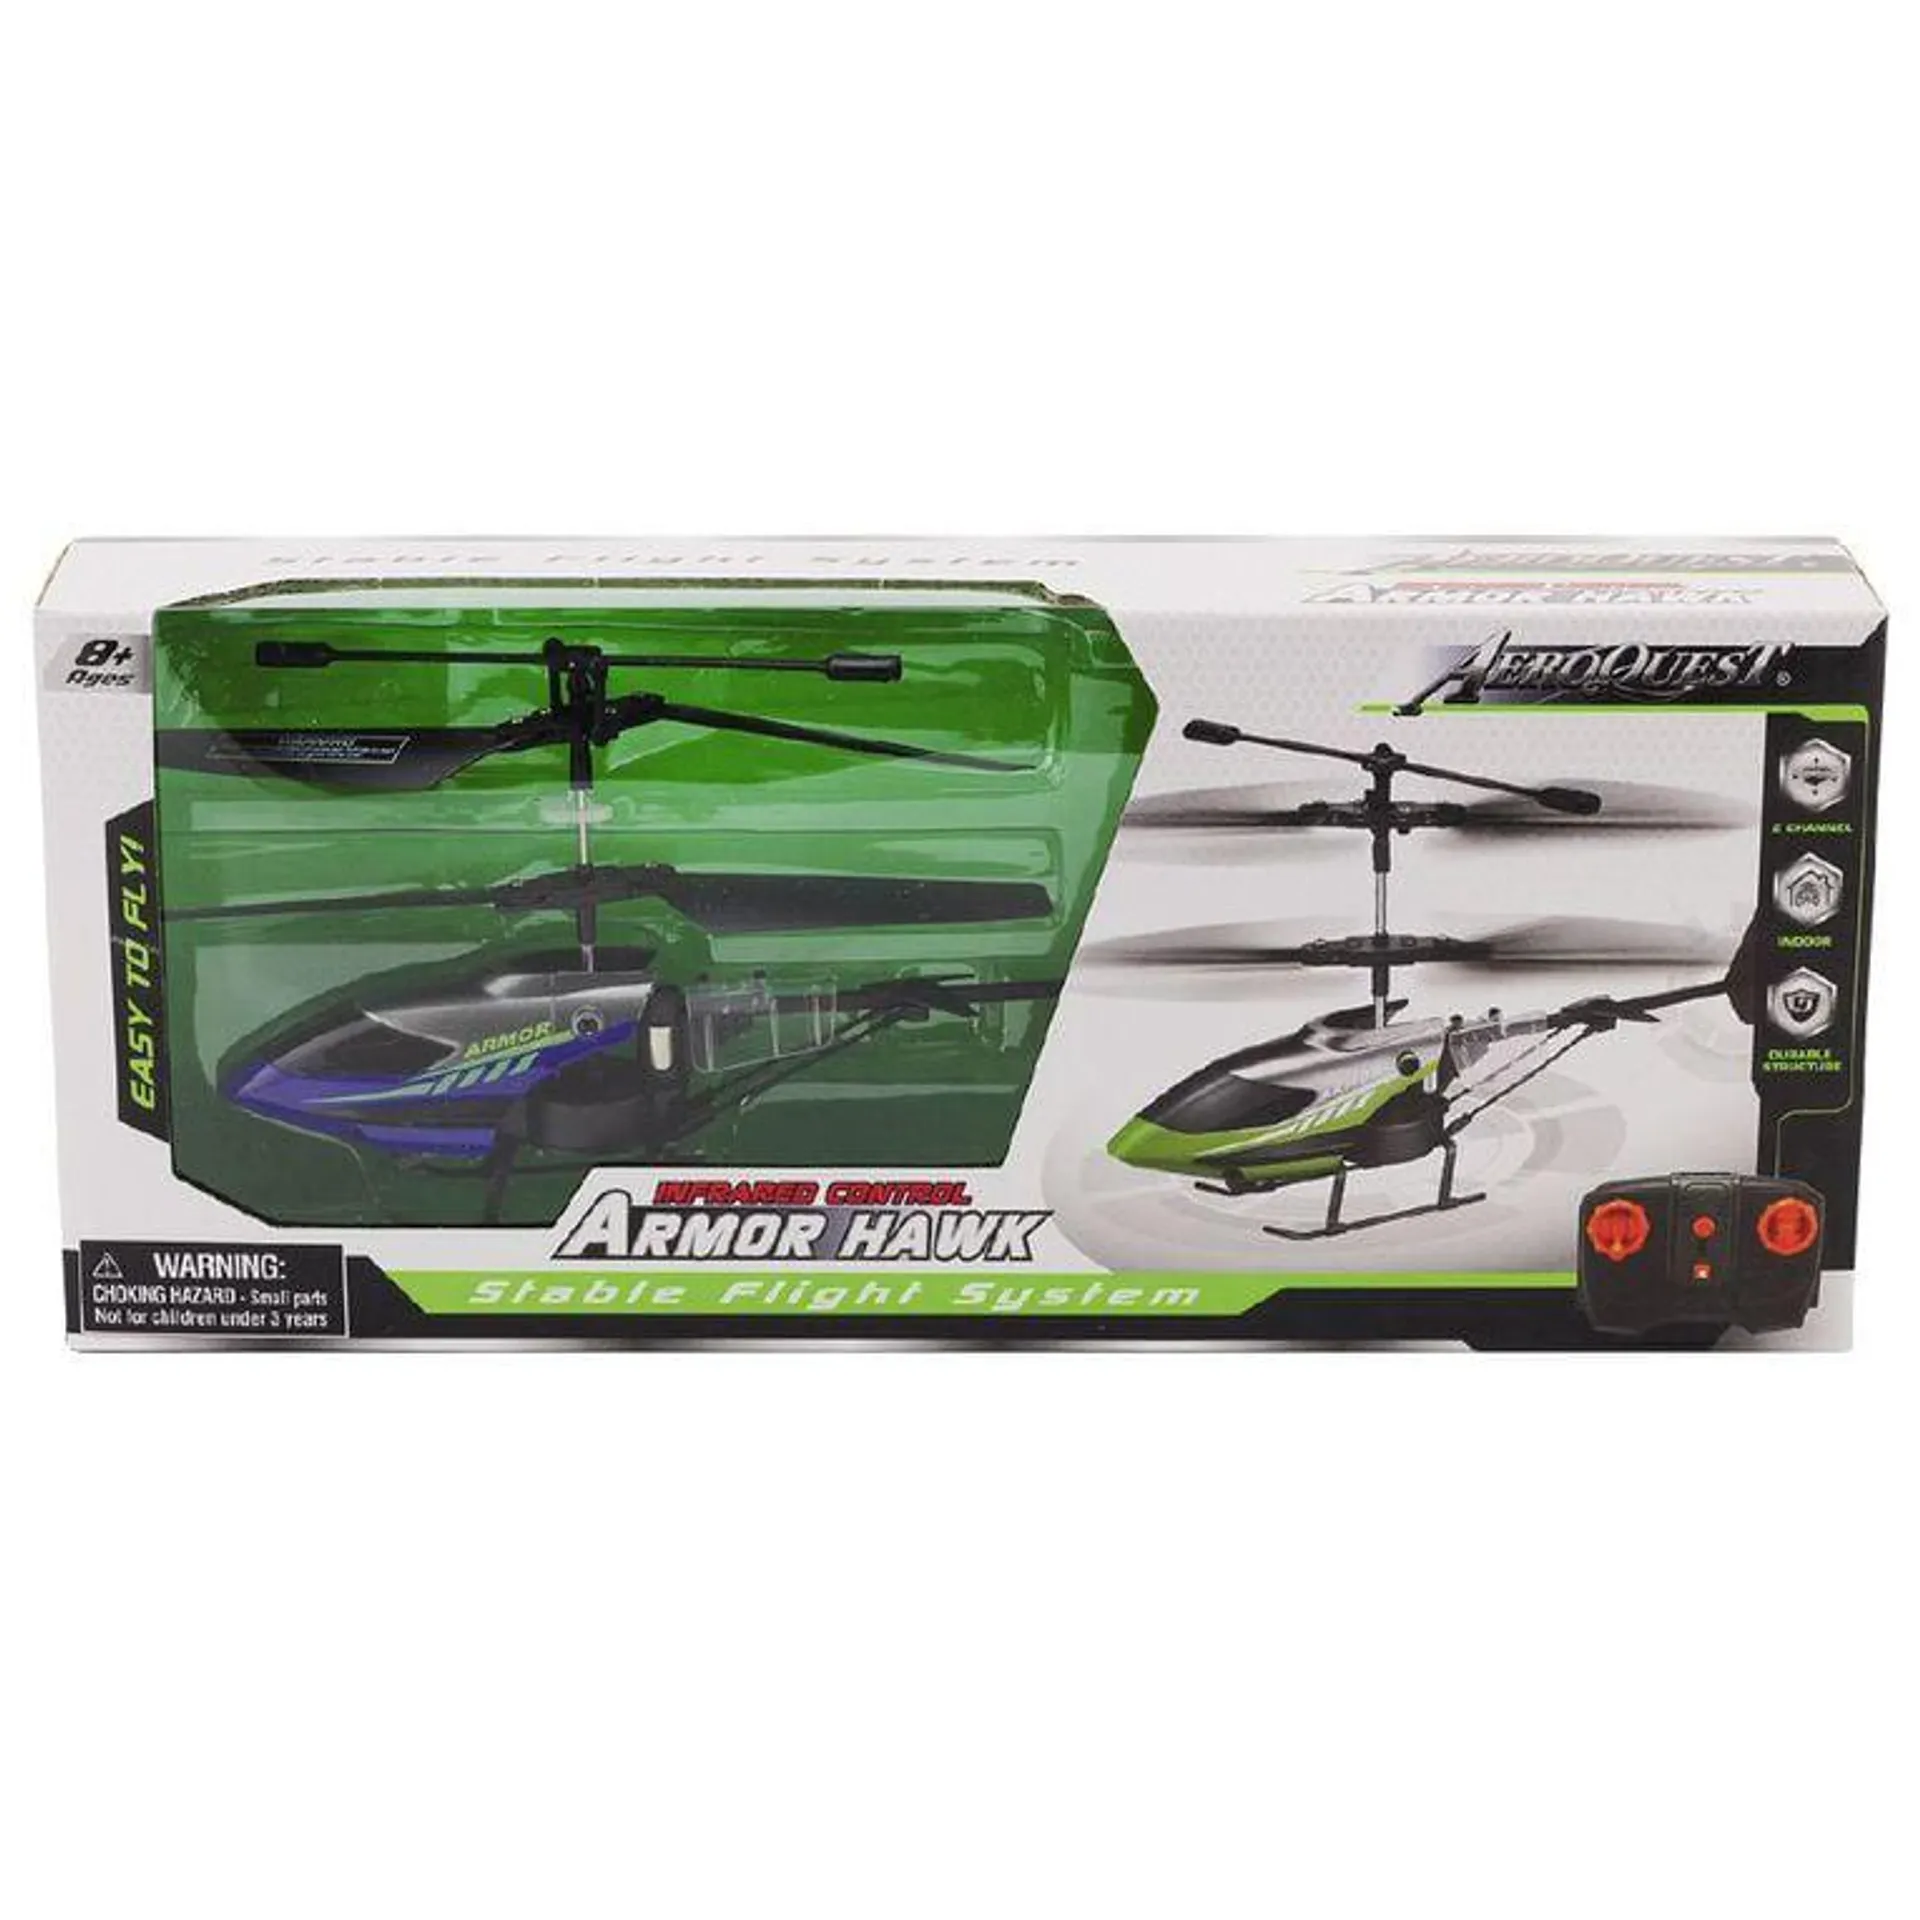 Aeroquest Dynamic Rider IR 2CH Helicopter Assorted